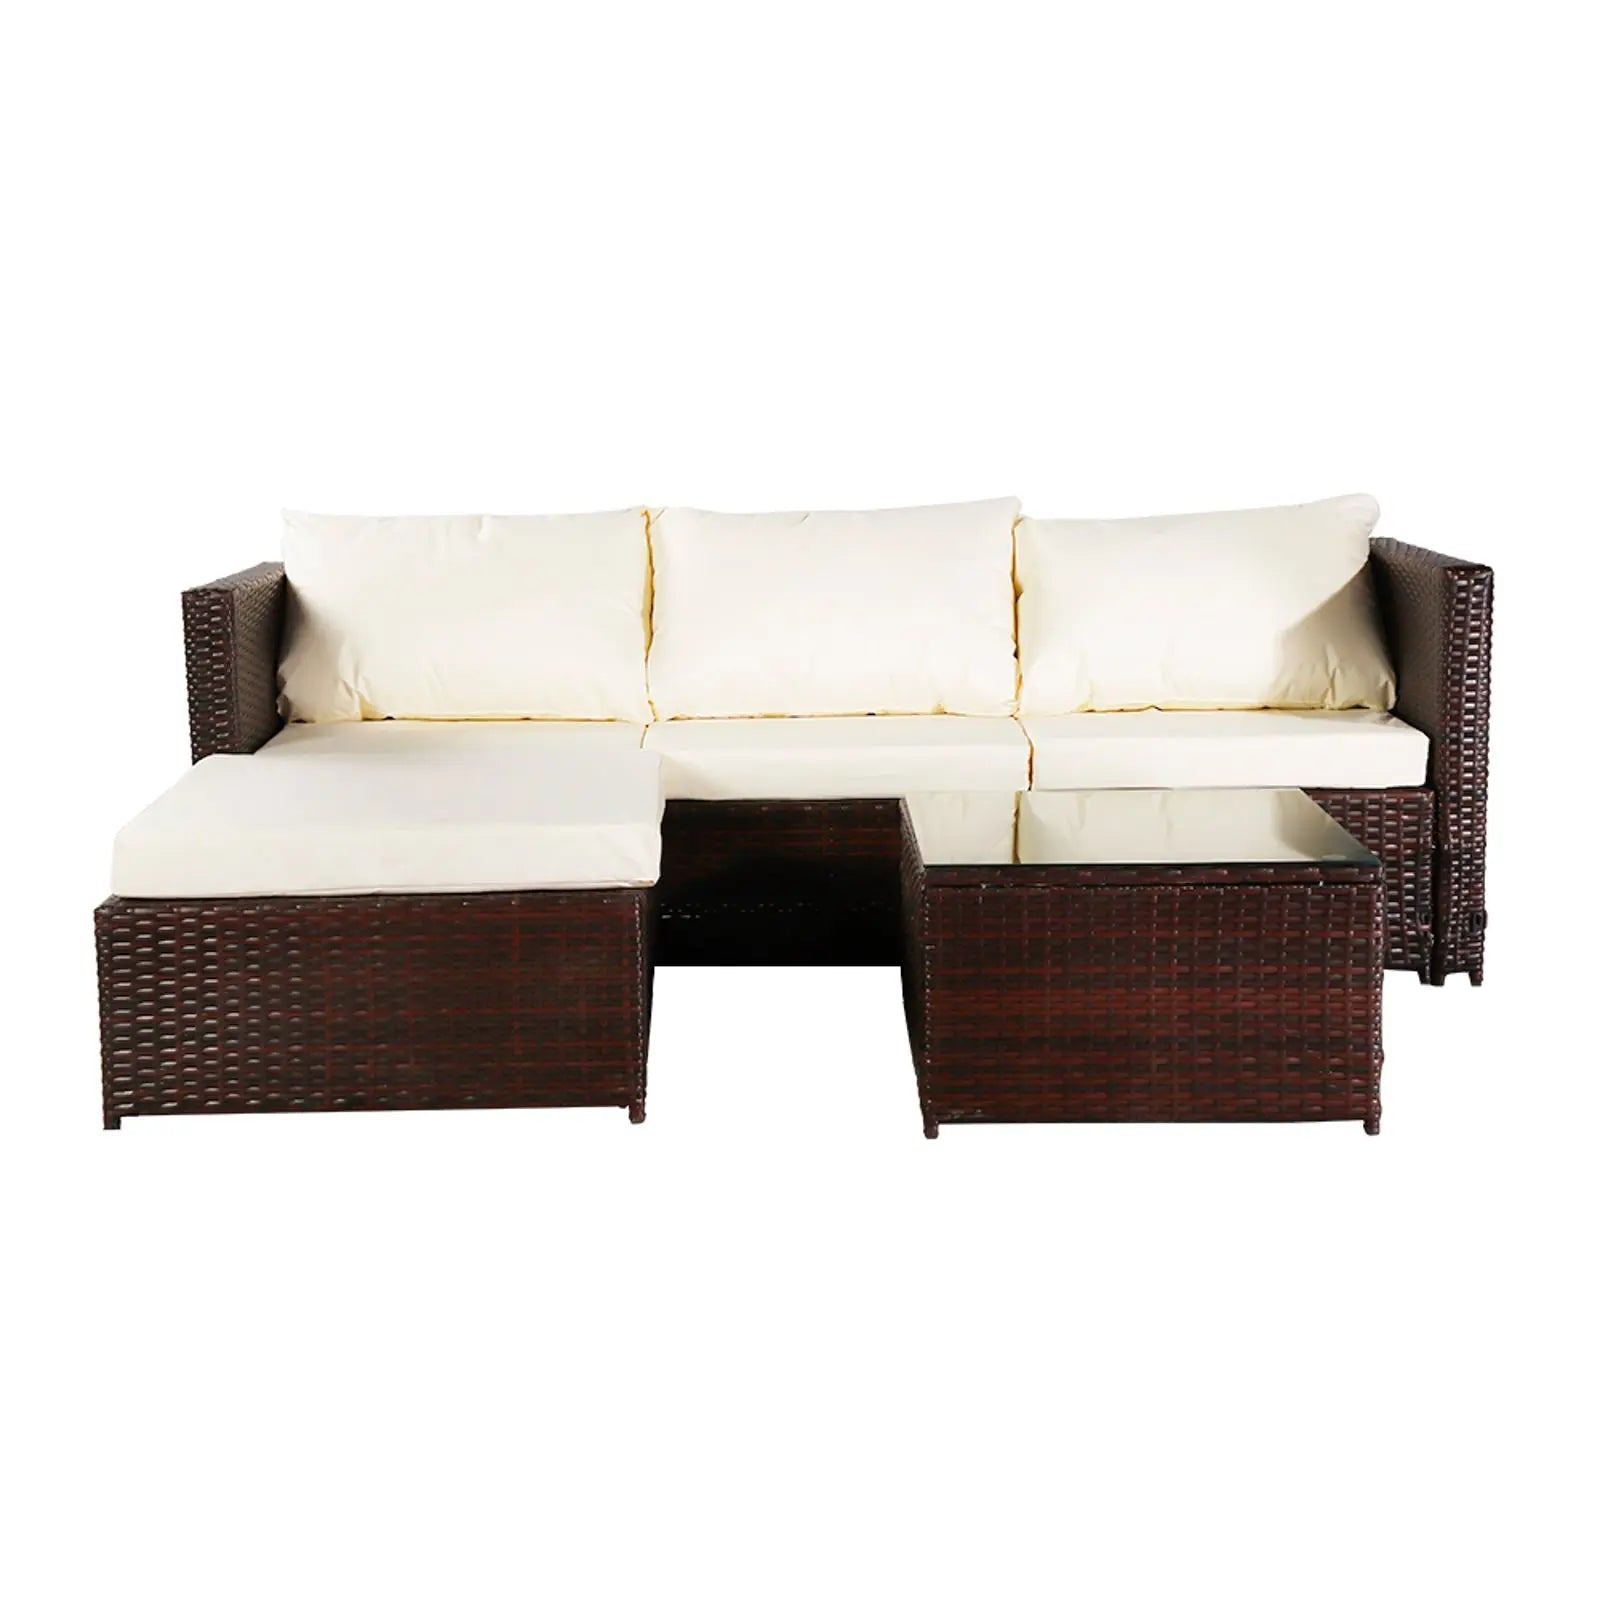 Three-piece Conjoined Sofa Pedal Coffee Table Brown (Combination of 2 Boxes) - Image #6